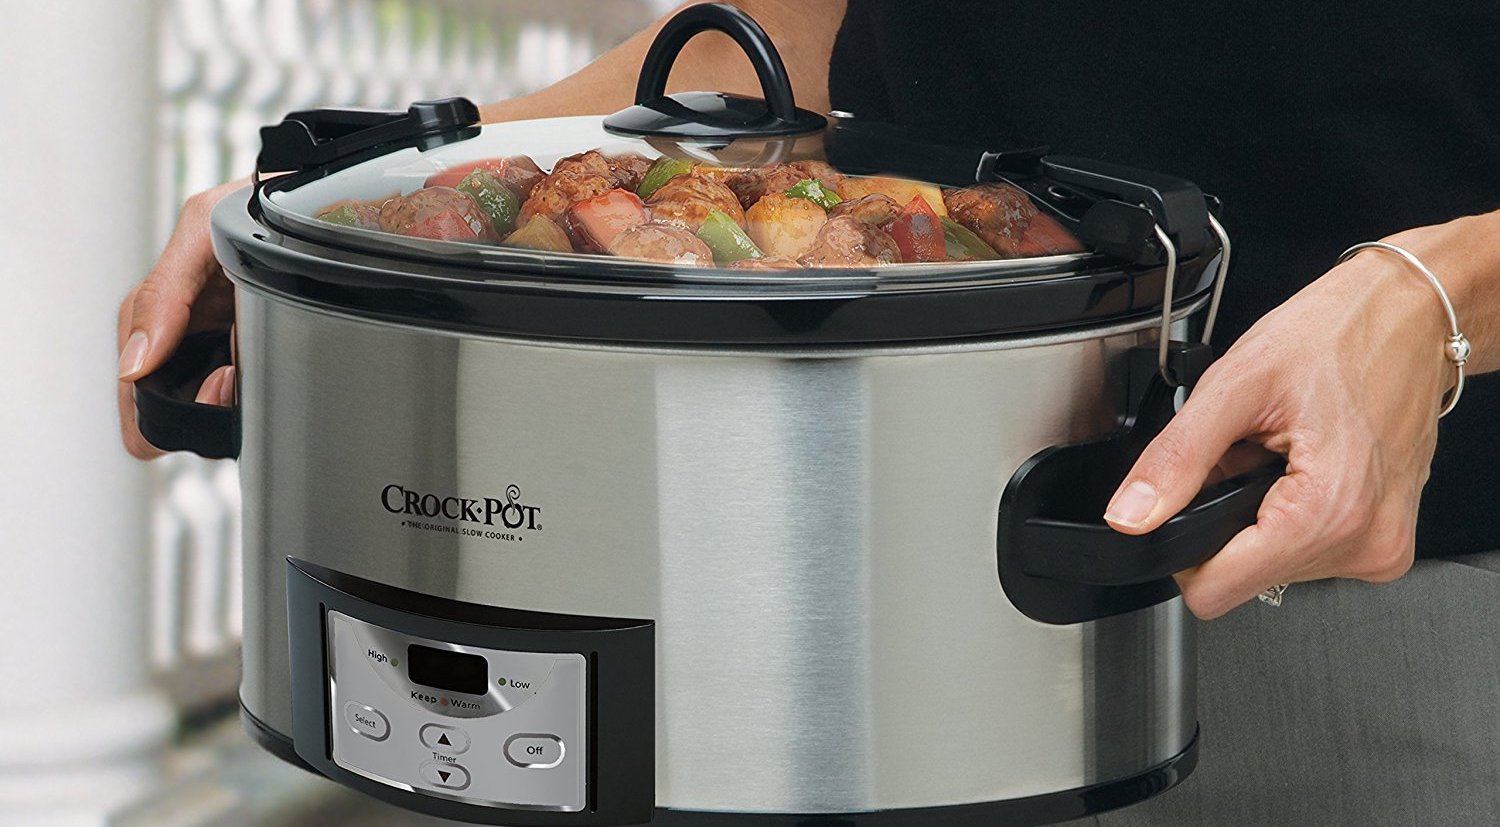 The best-selling stainless steel Crock-Pot 6-Quart Cook and Carry